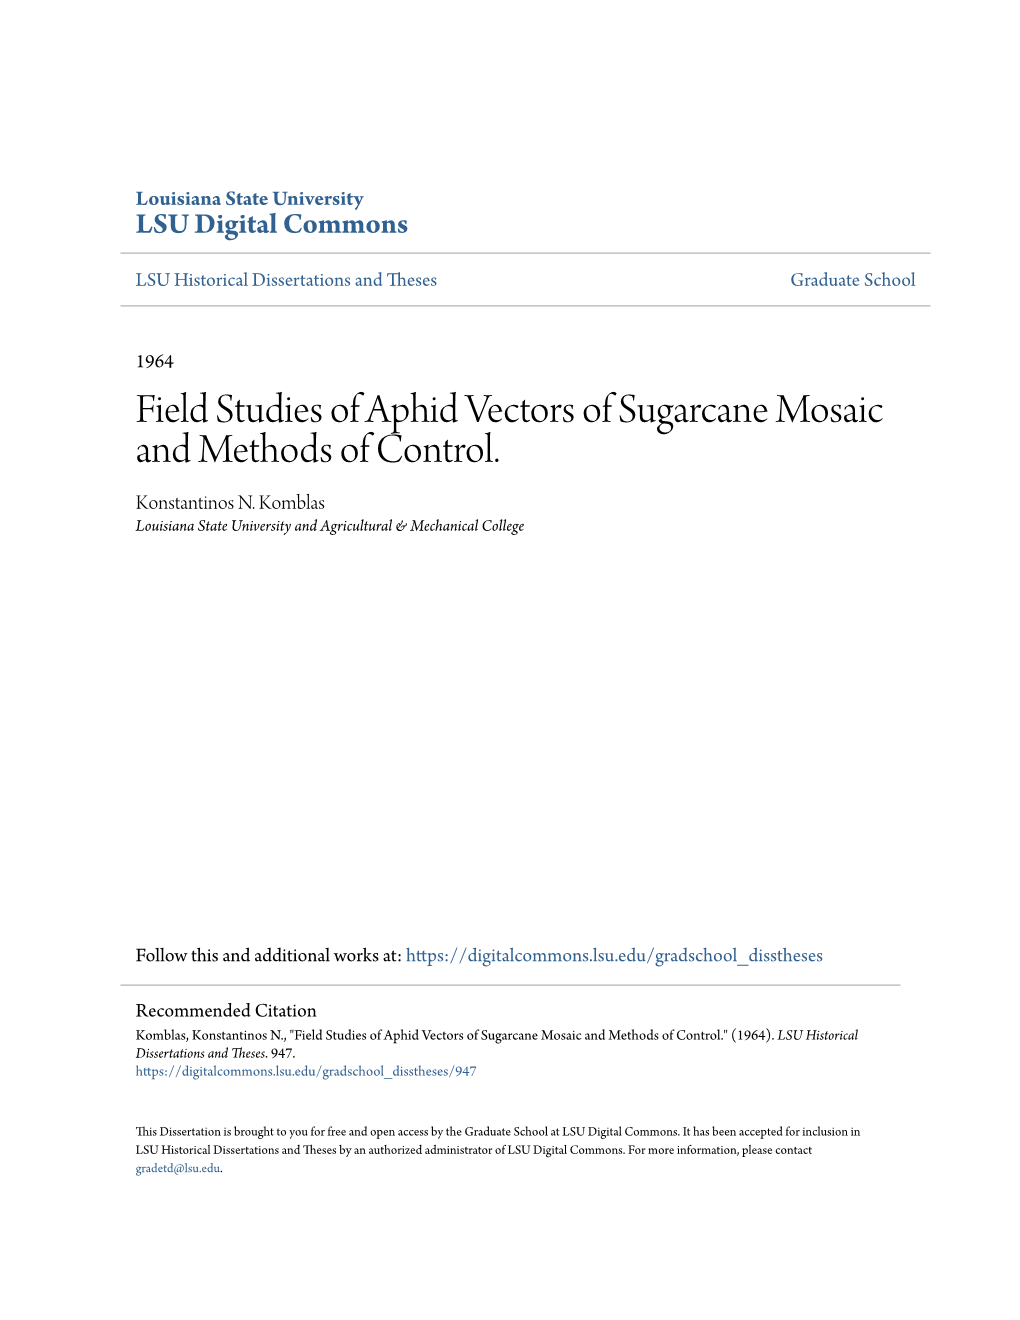 Field Studies of Aphid Vectors of Sugarcane Mosaic and Methods of Control